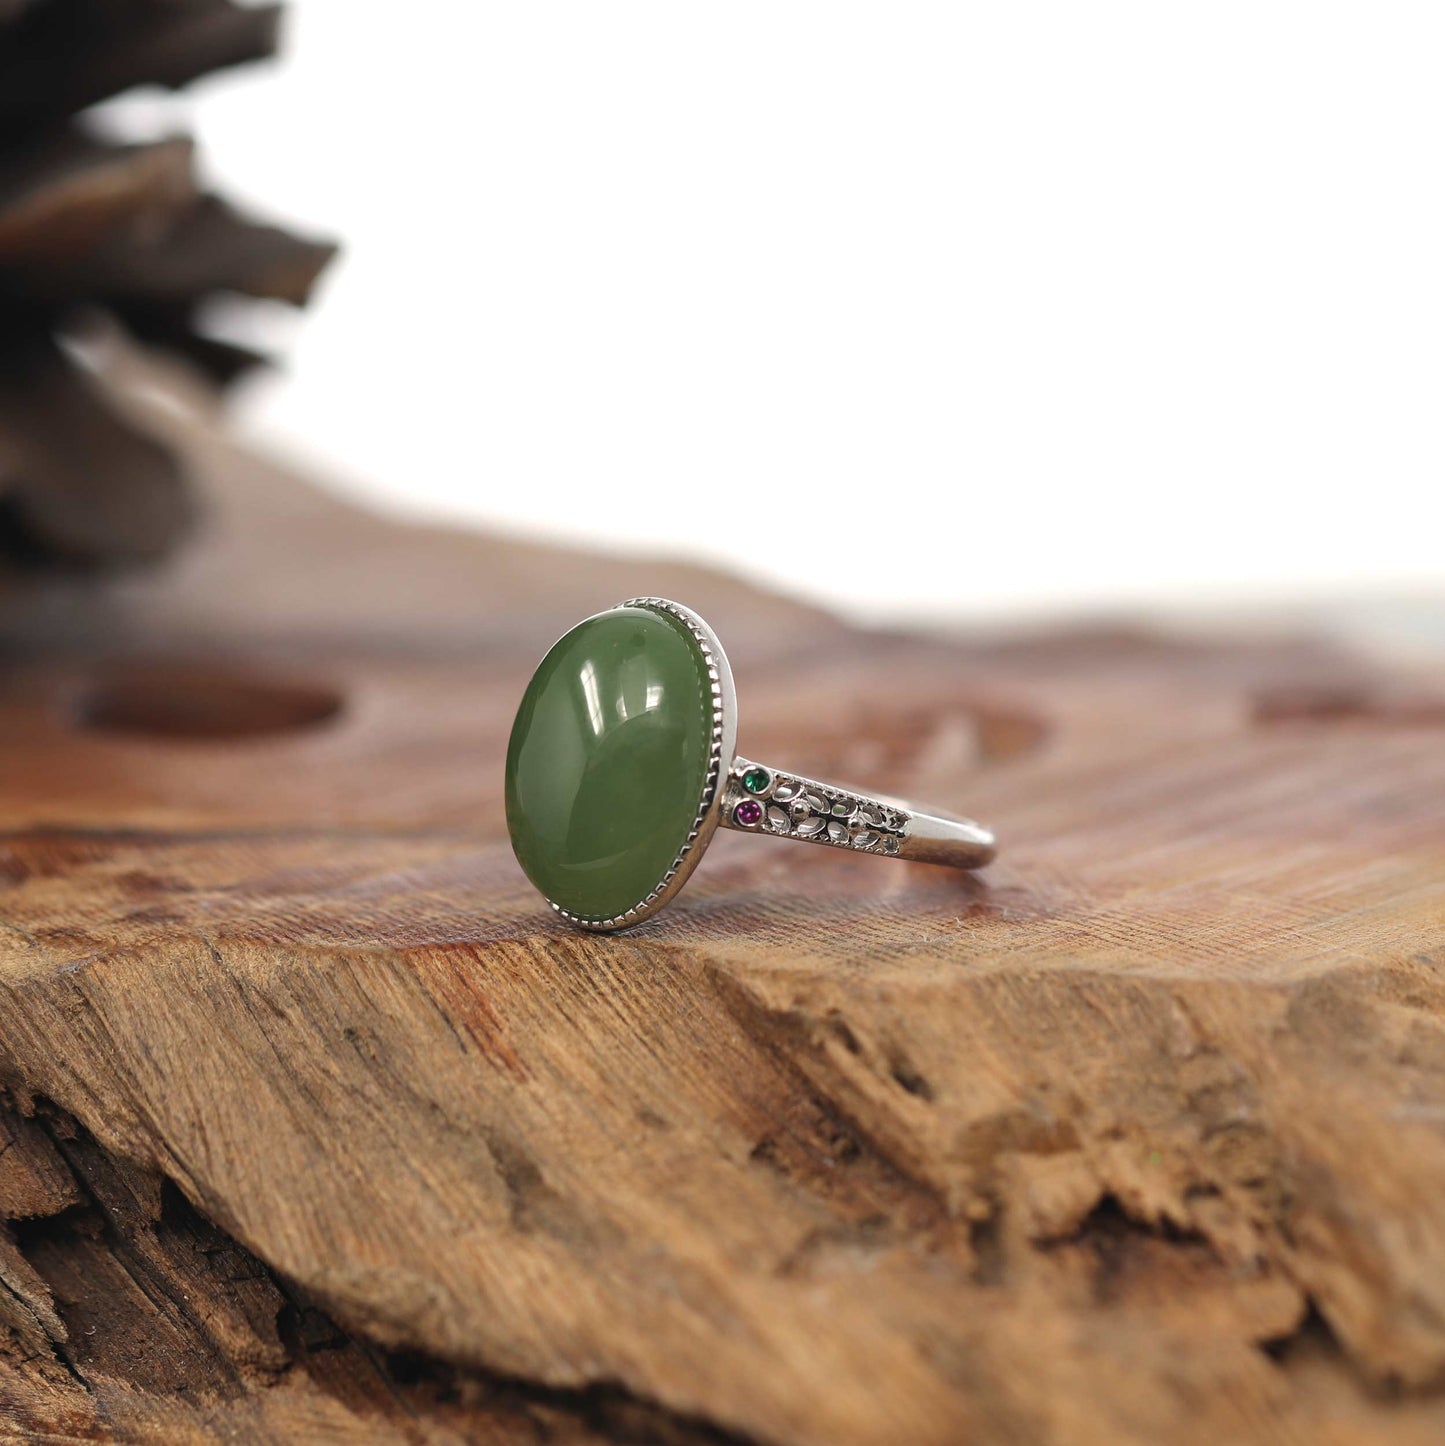 RealJade® Co. RealJade® Co. "Classic Oval With Accents" Sterling Silver Natural Green Nephrite Jade Adjustable Ring For Her